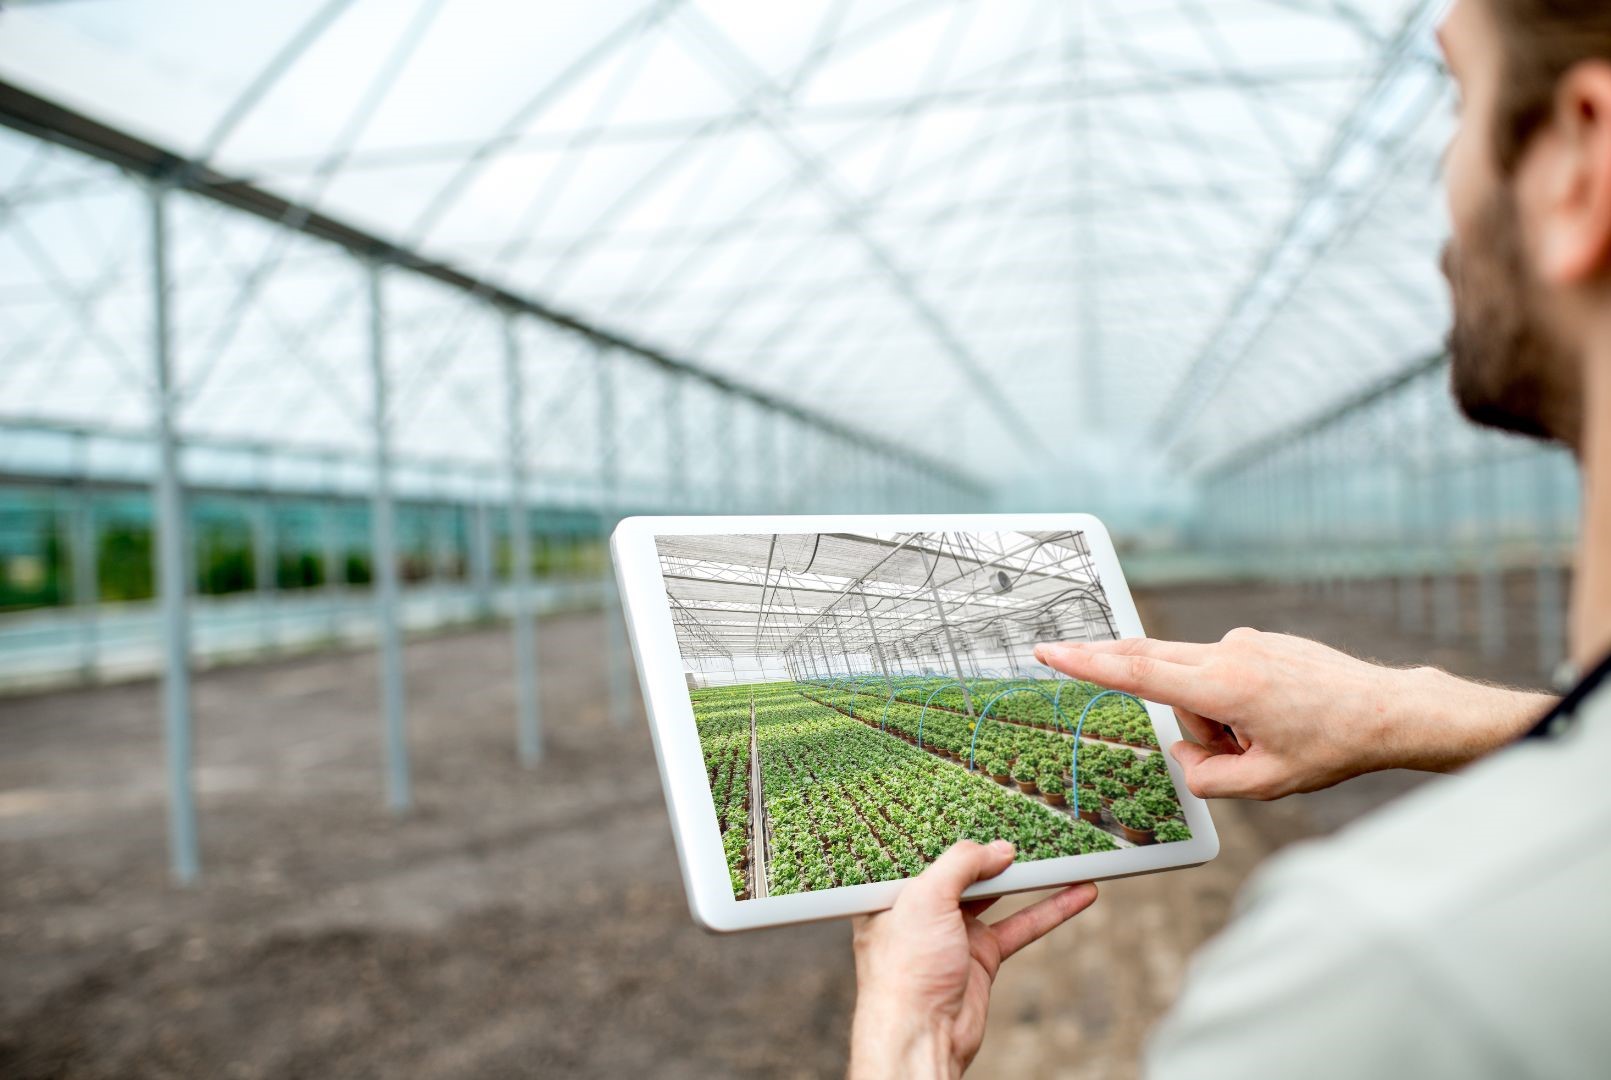 10 Aspects and Benefits of Project Management in Agriculture